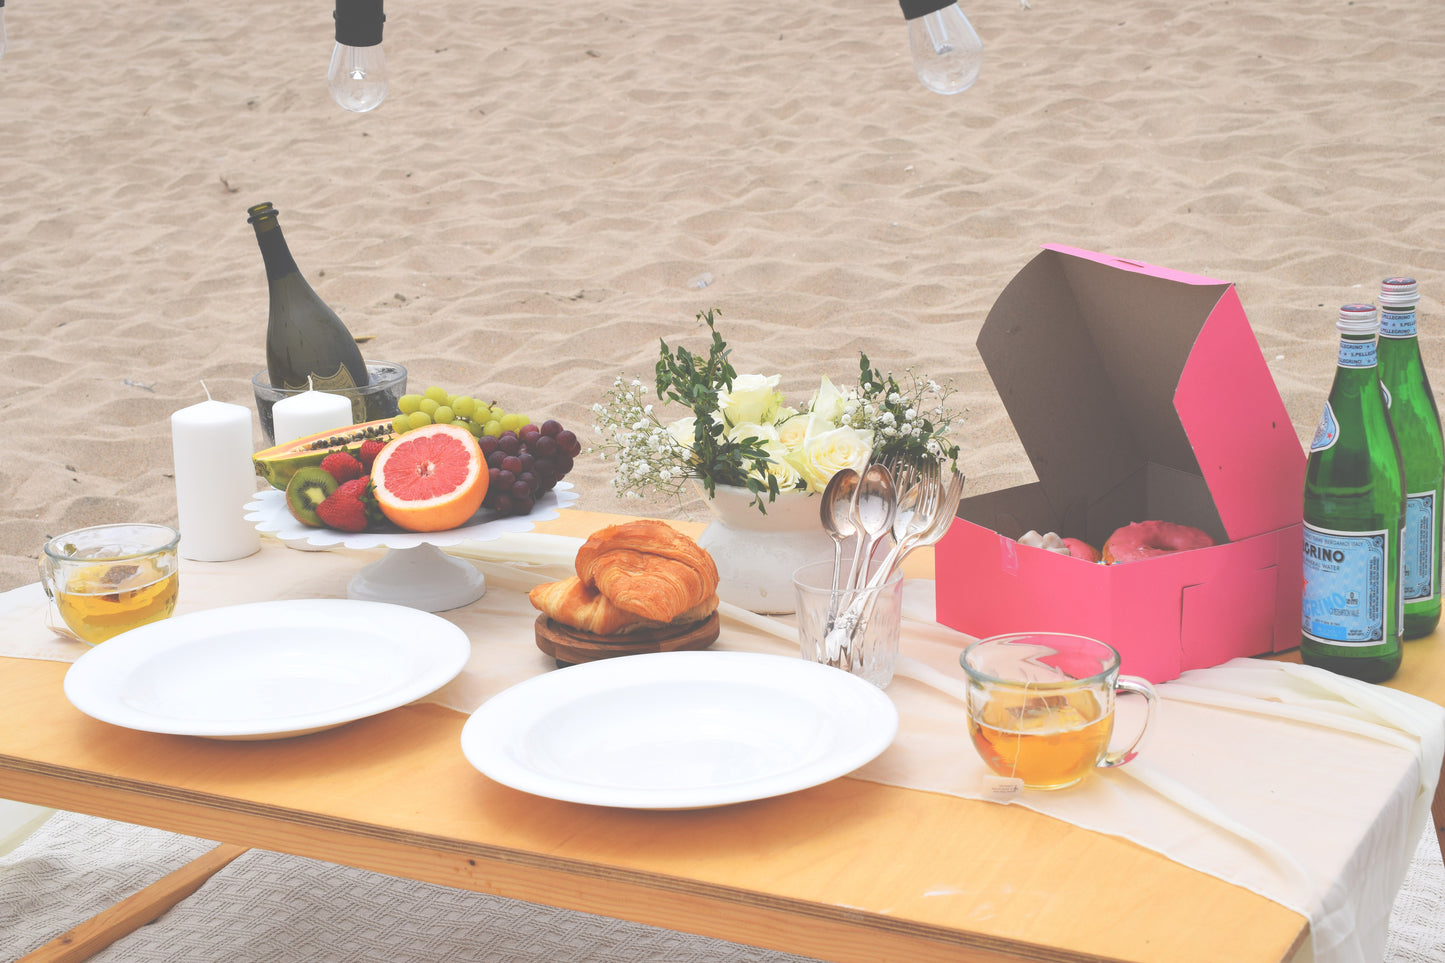 LUXURY BREAKFAST PICNIC PACKAGE FOR 2